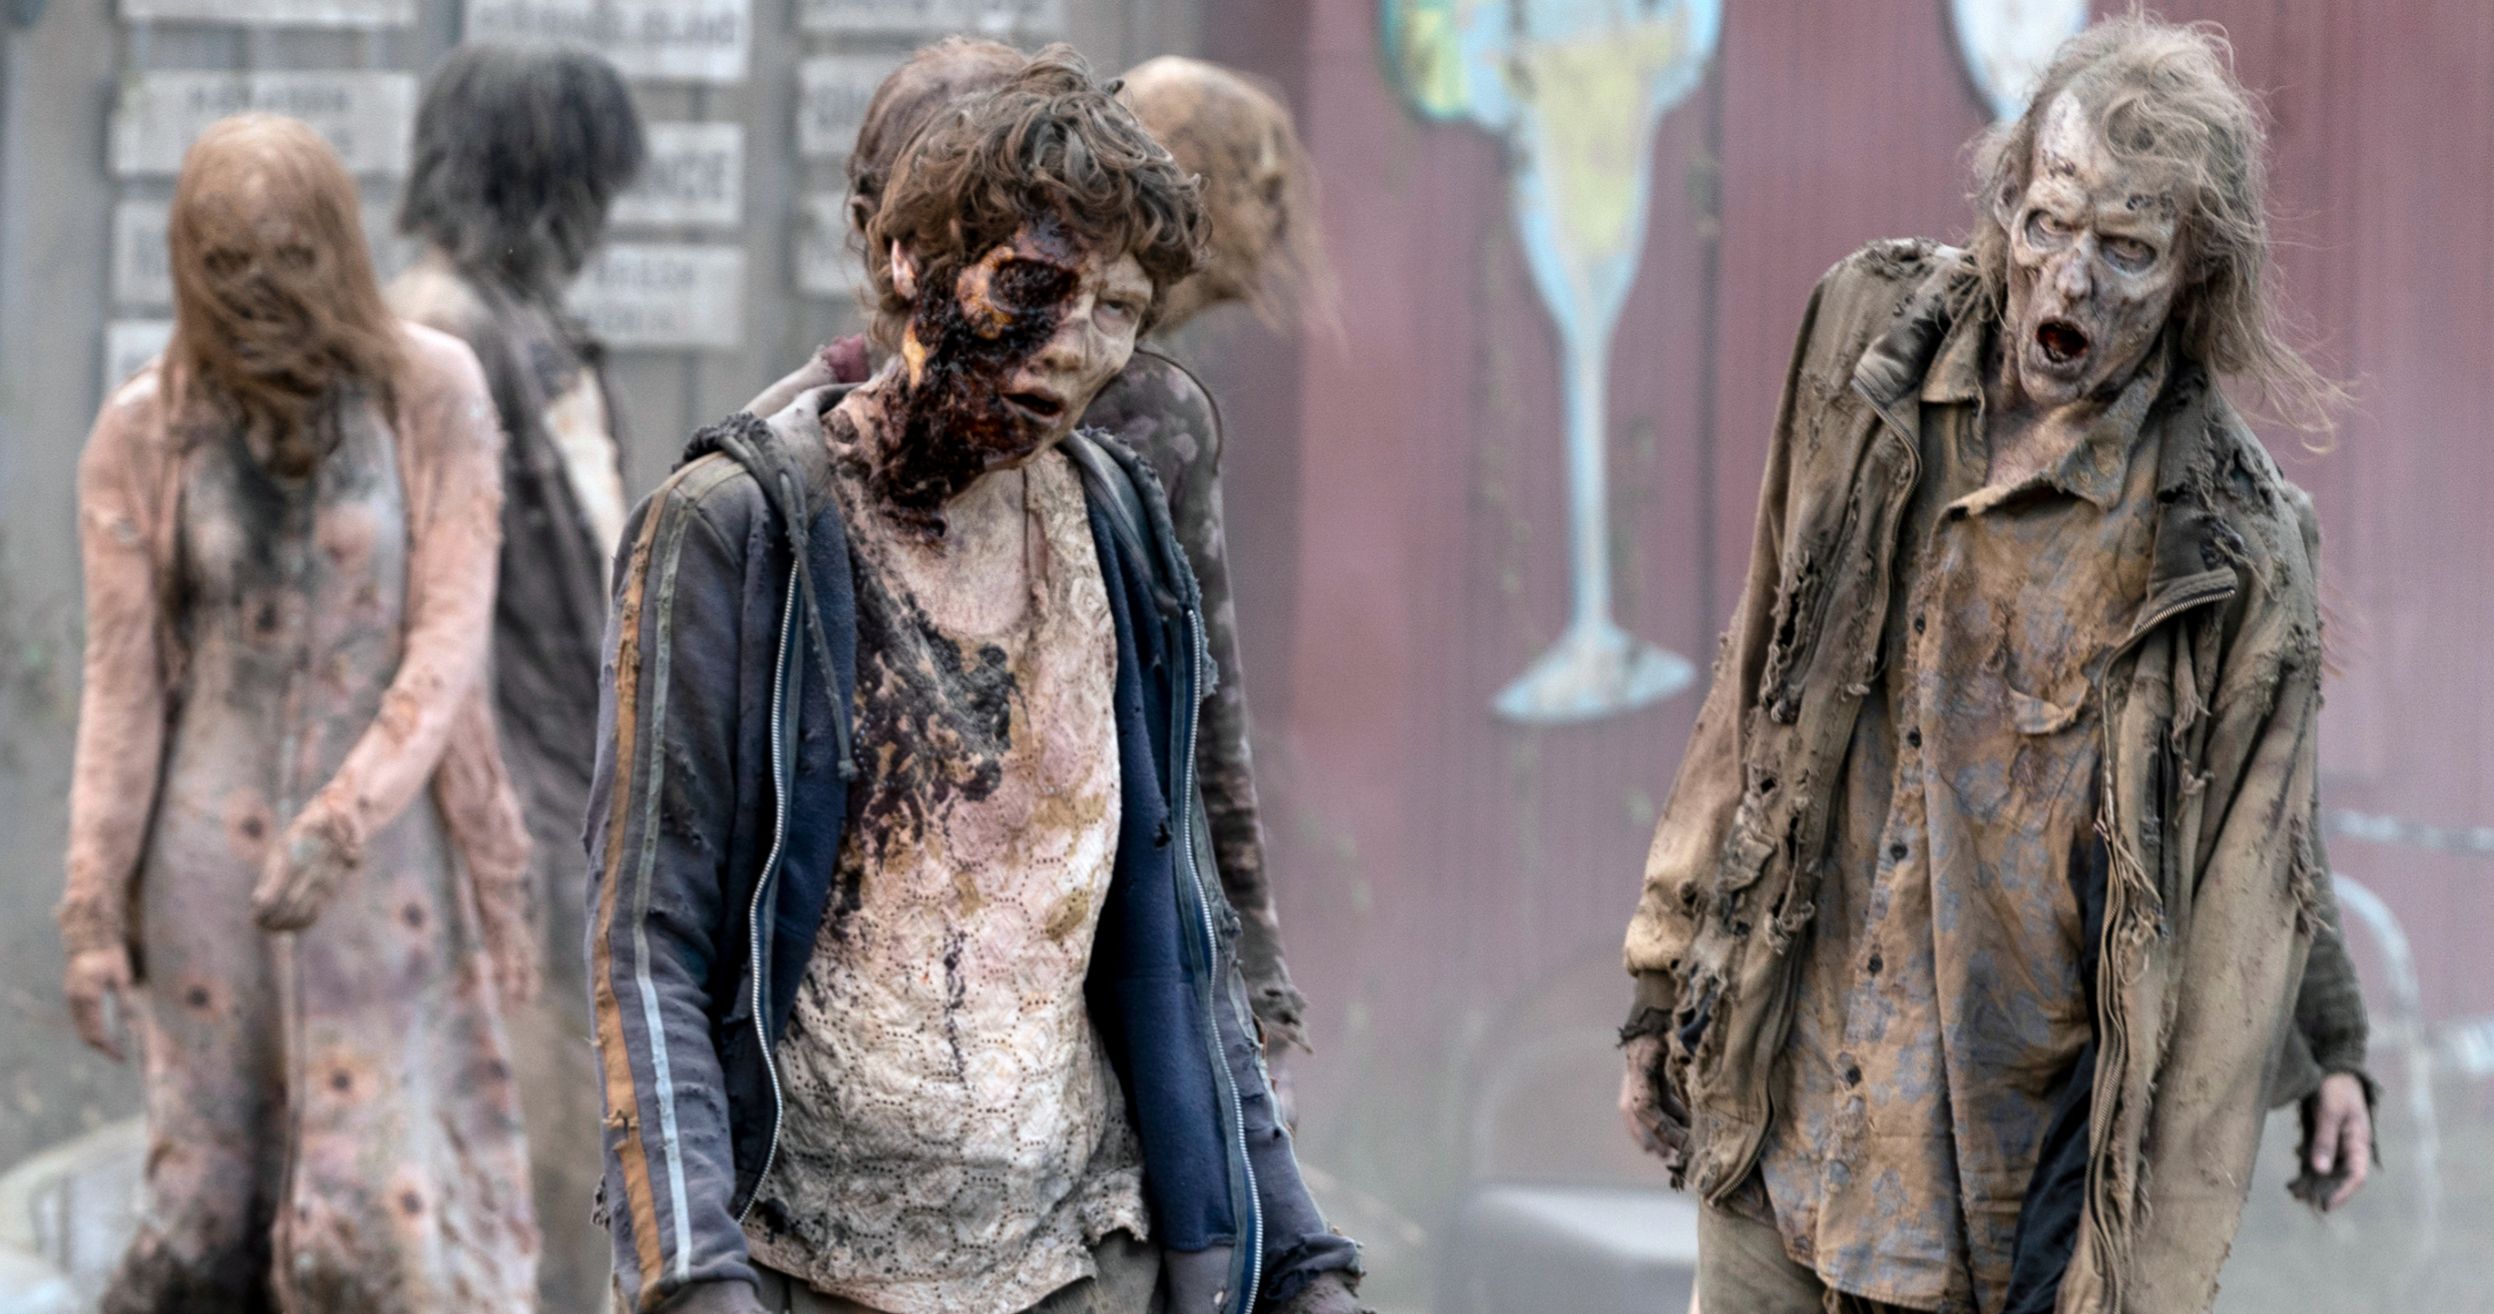 The Walking Dead: World Beyond Gets April Premiere Date, New Images Revealed